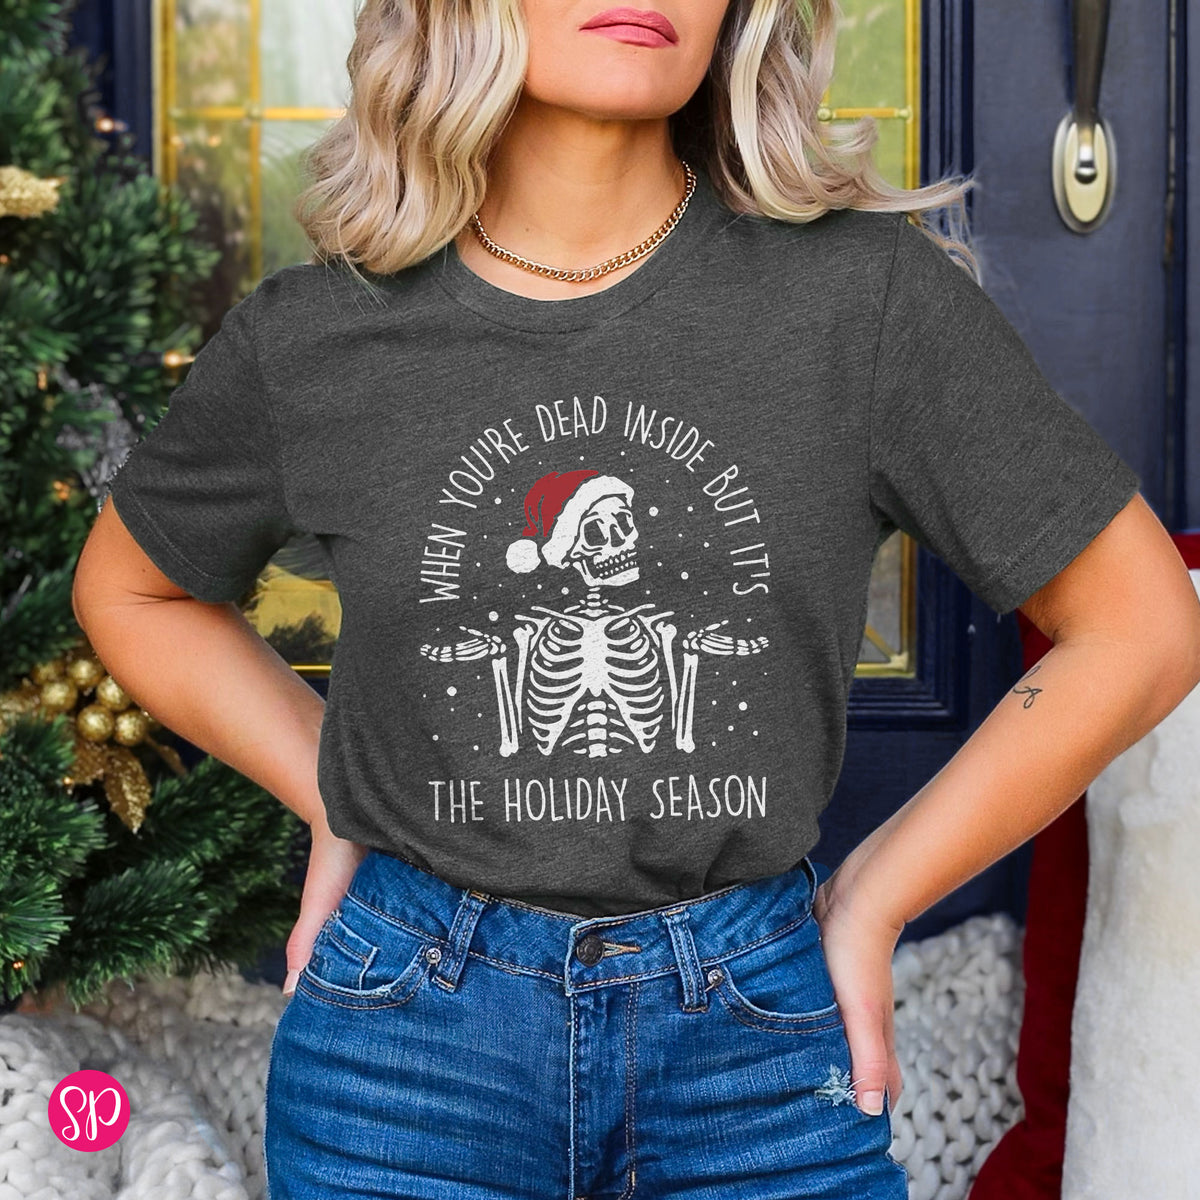 When You're Dead Inside But It's the Holiday Season Unisex T-Shirt